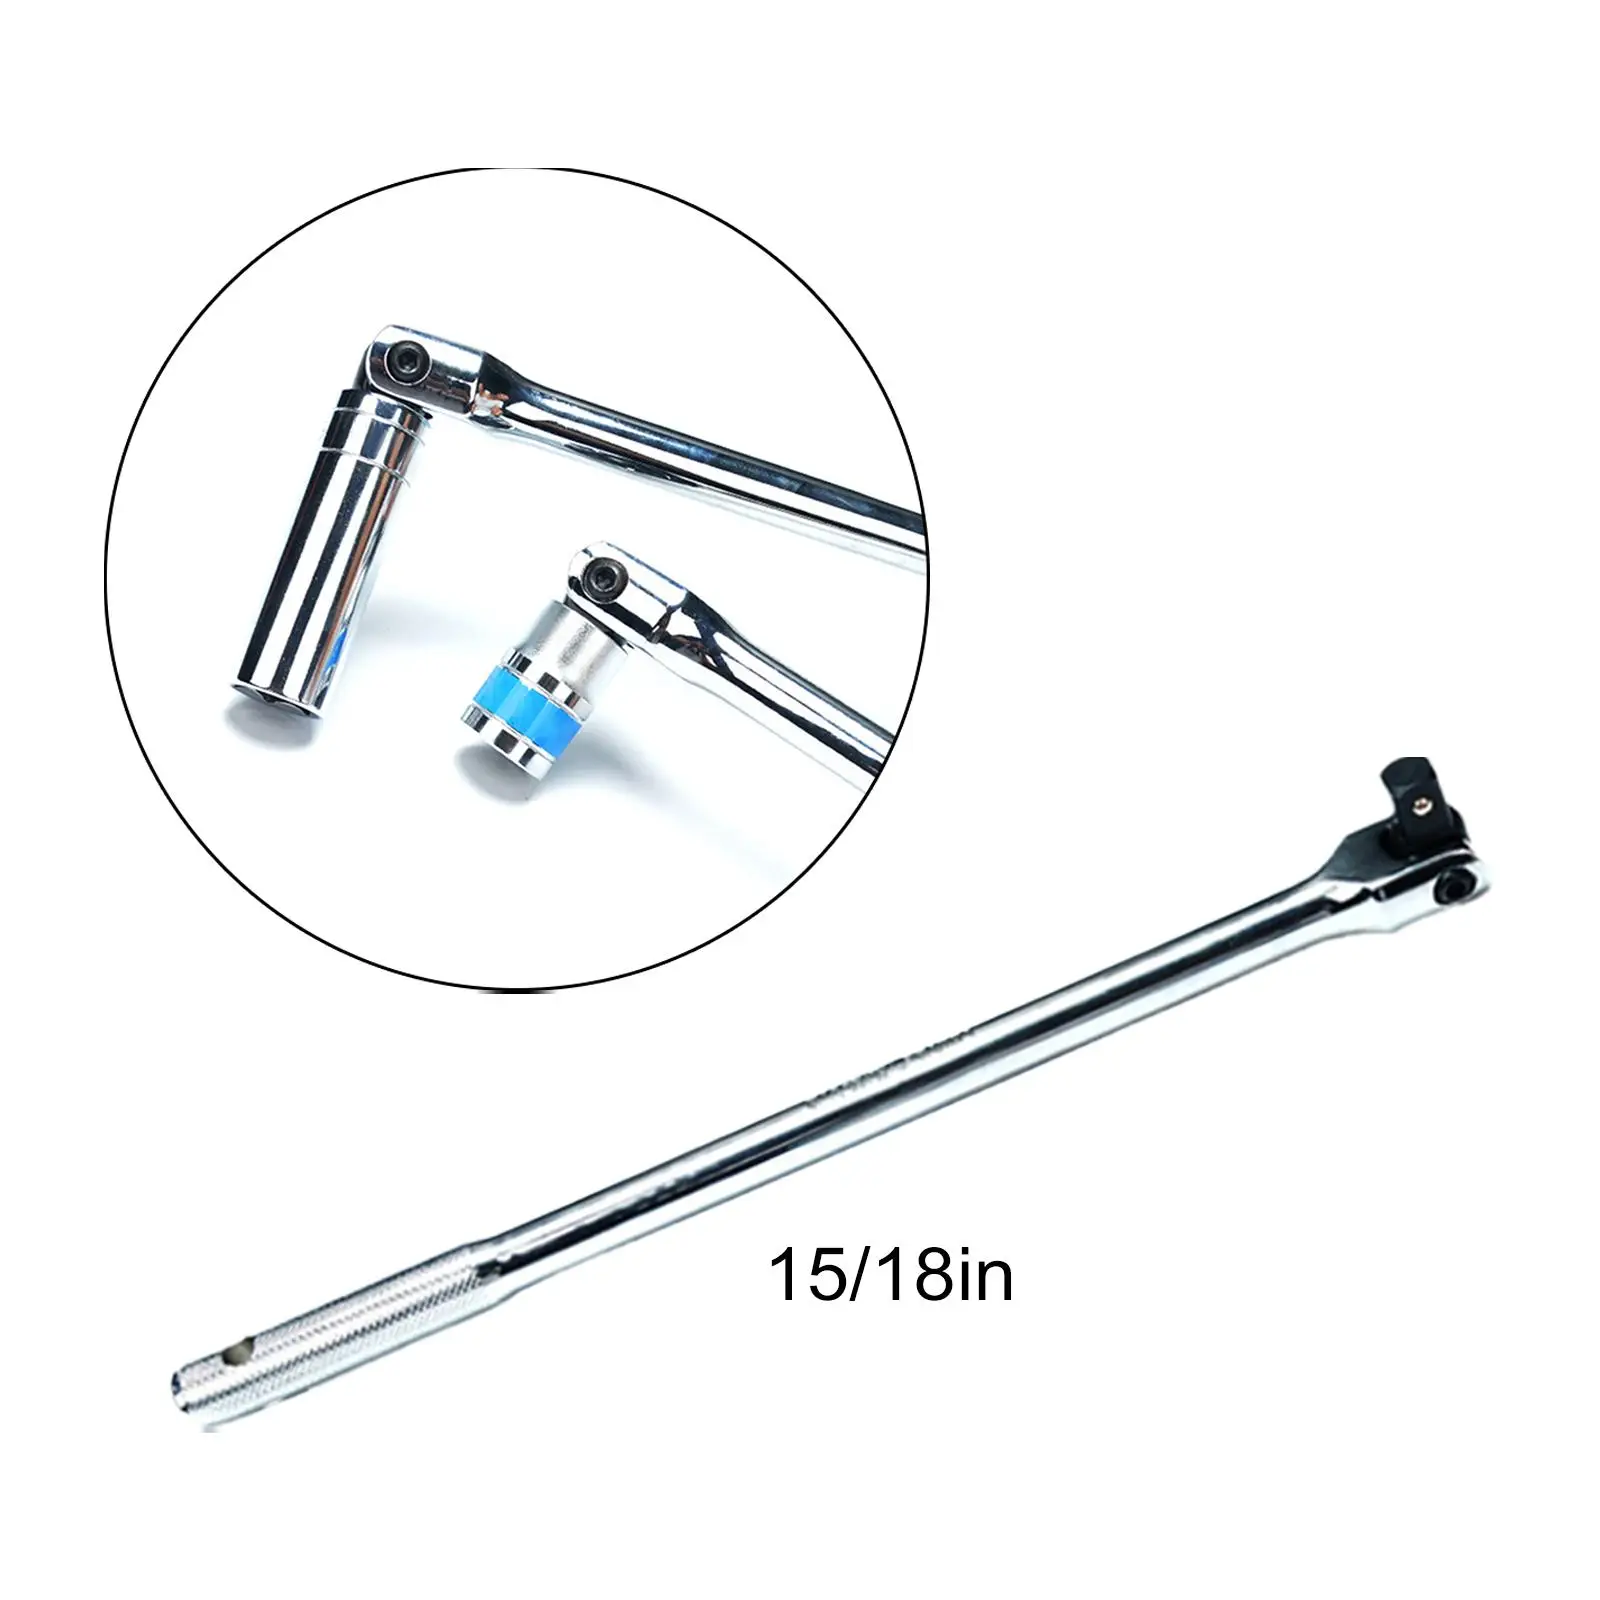 Head Socket Wrench Durable Adjustable Torque Wrench Head Strong Lever Long Force Bar Activity for Repairing Maintenance durable